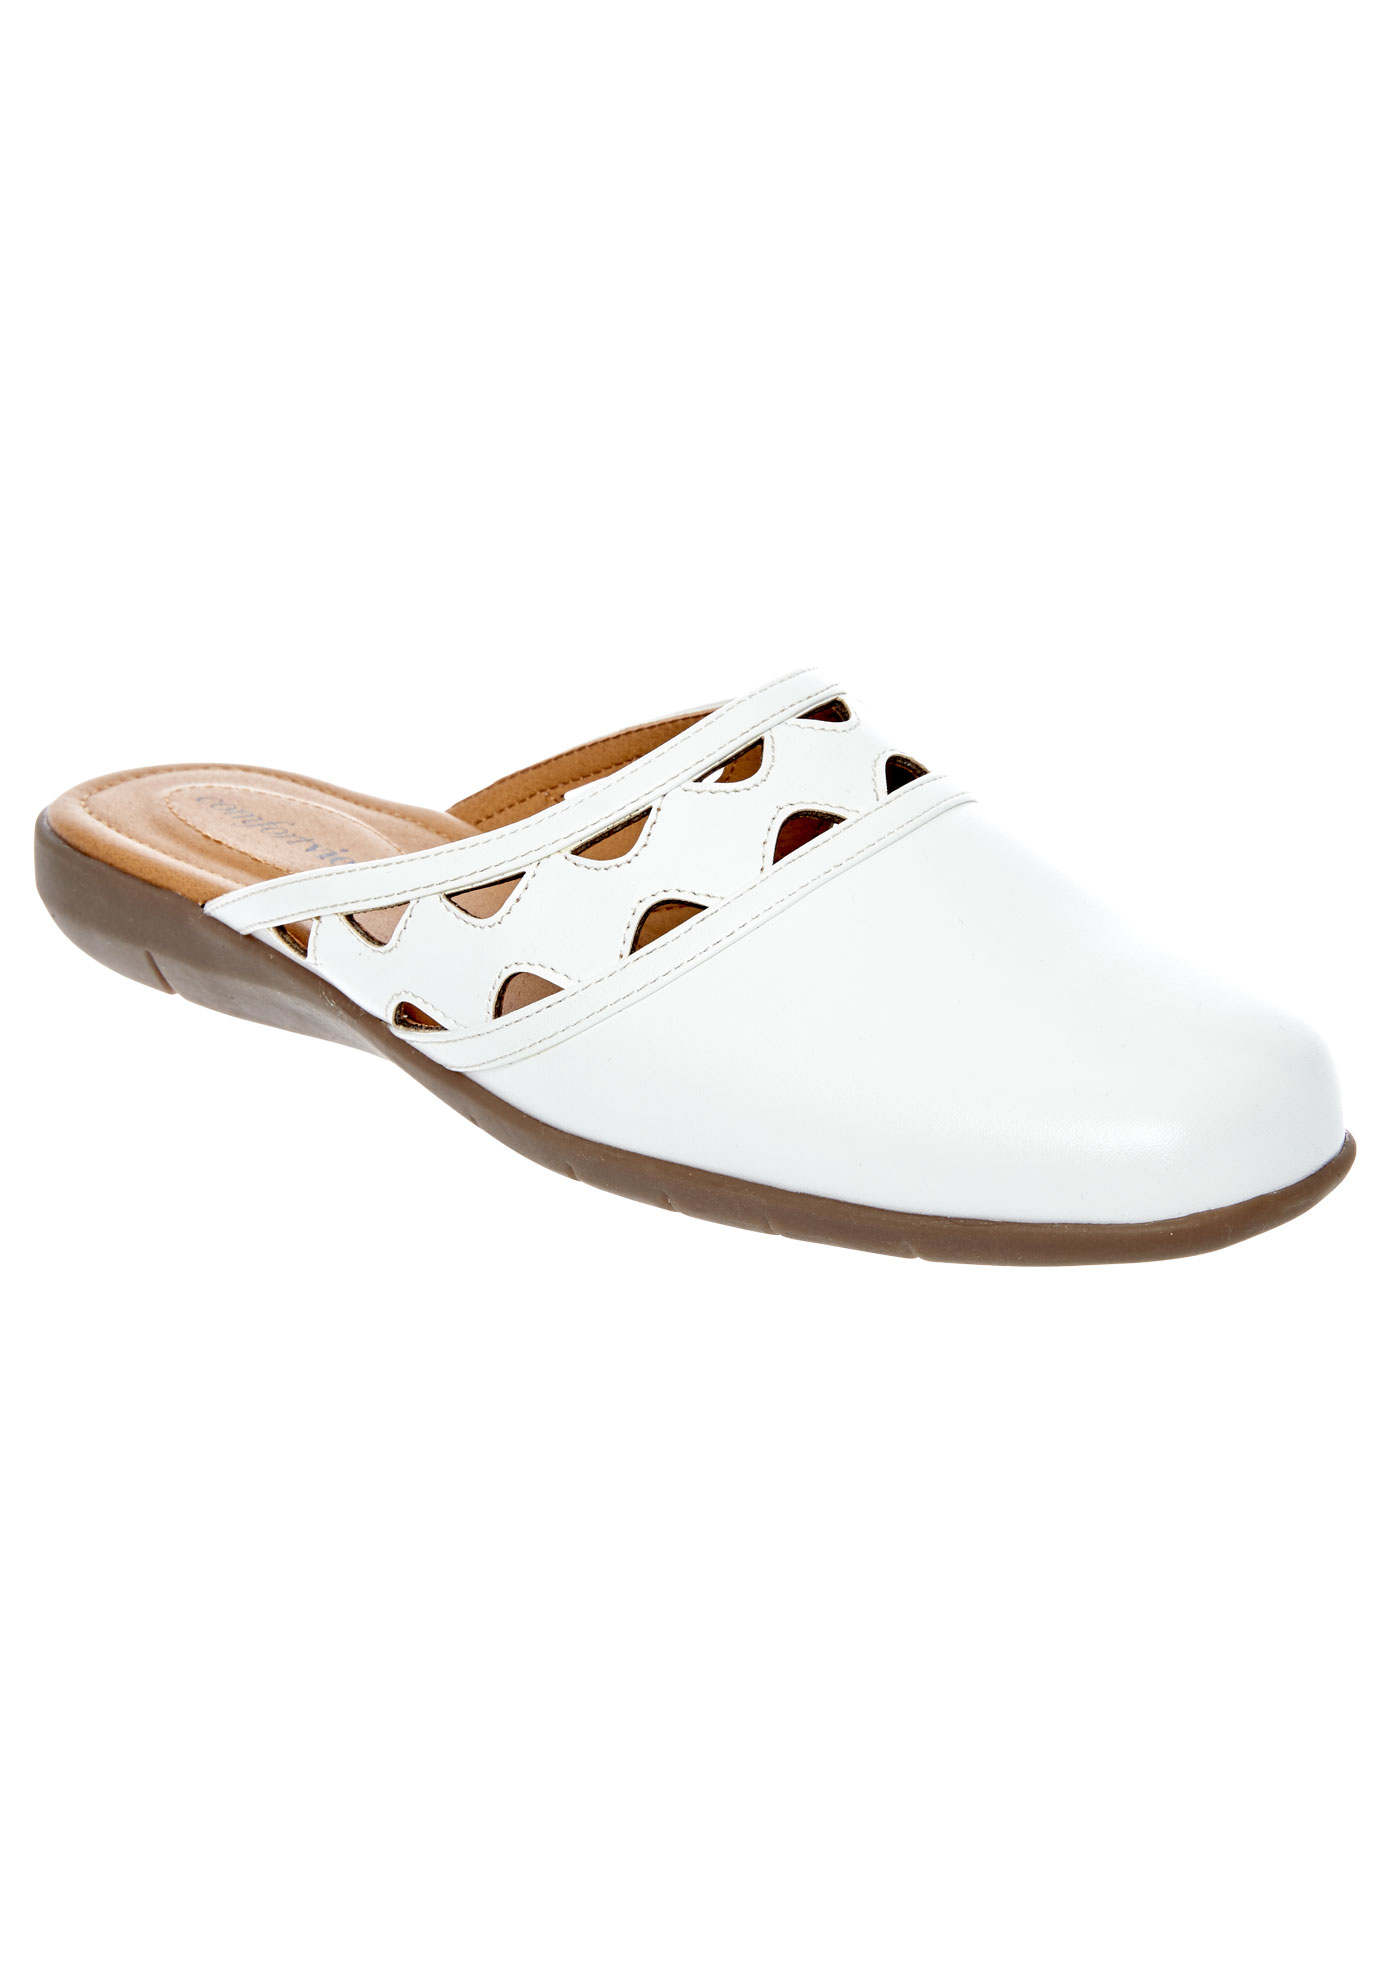 Comfortview Women's Wide Width The Mckenna Slip On Mule Shoes - image 1 of 7